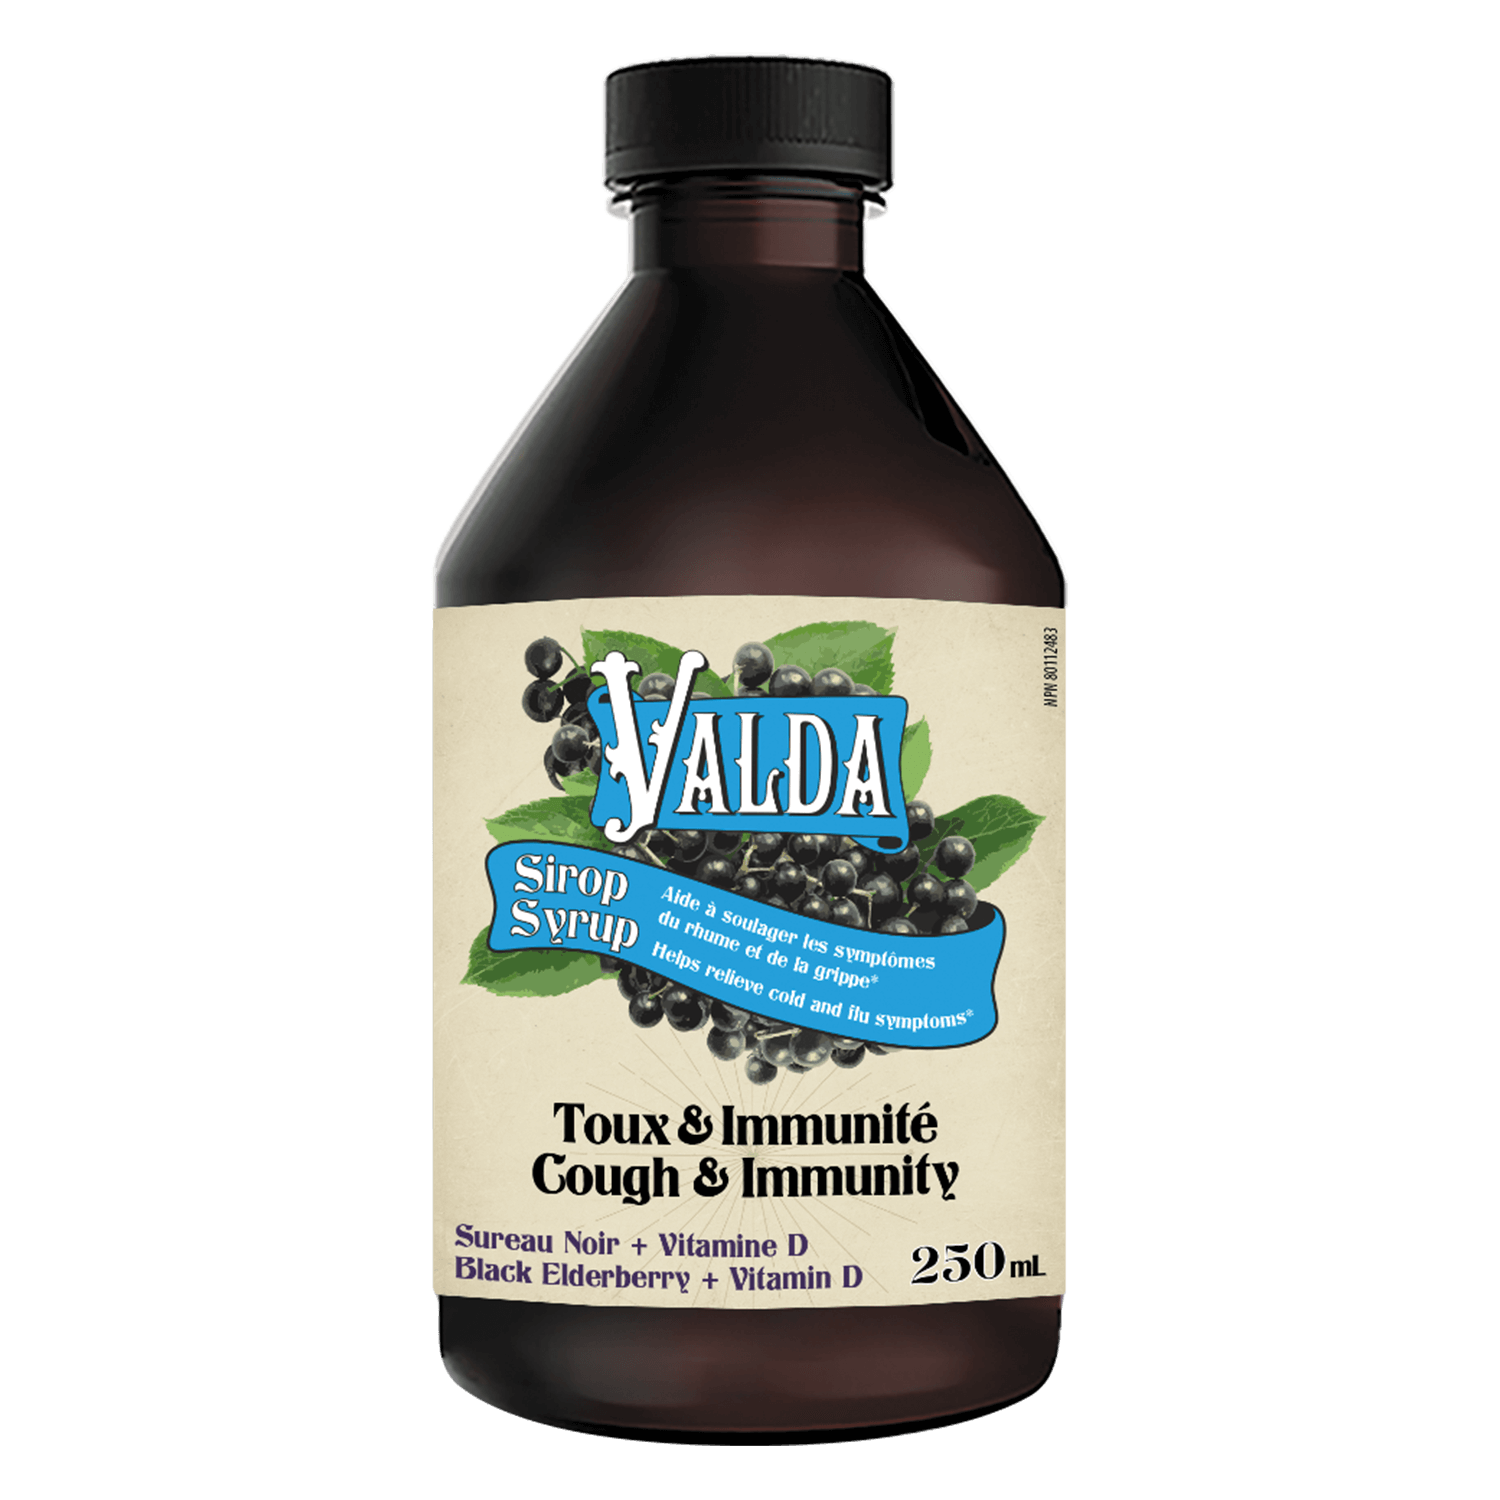 VALDA Pastilles Menthol Herb Candy Soothes / Cools the throat - Select